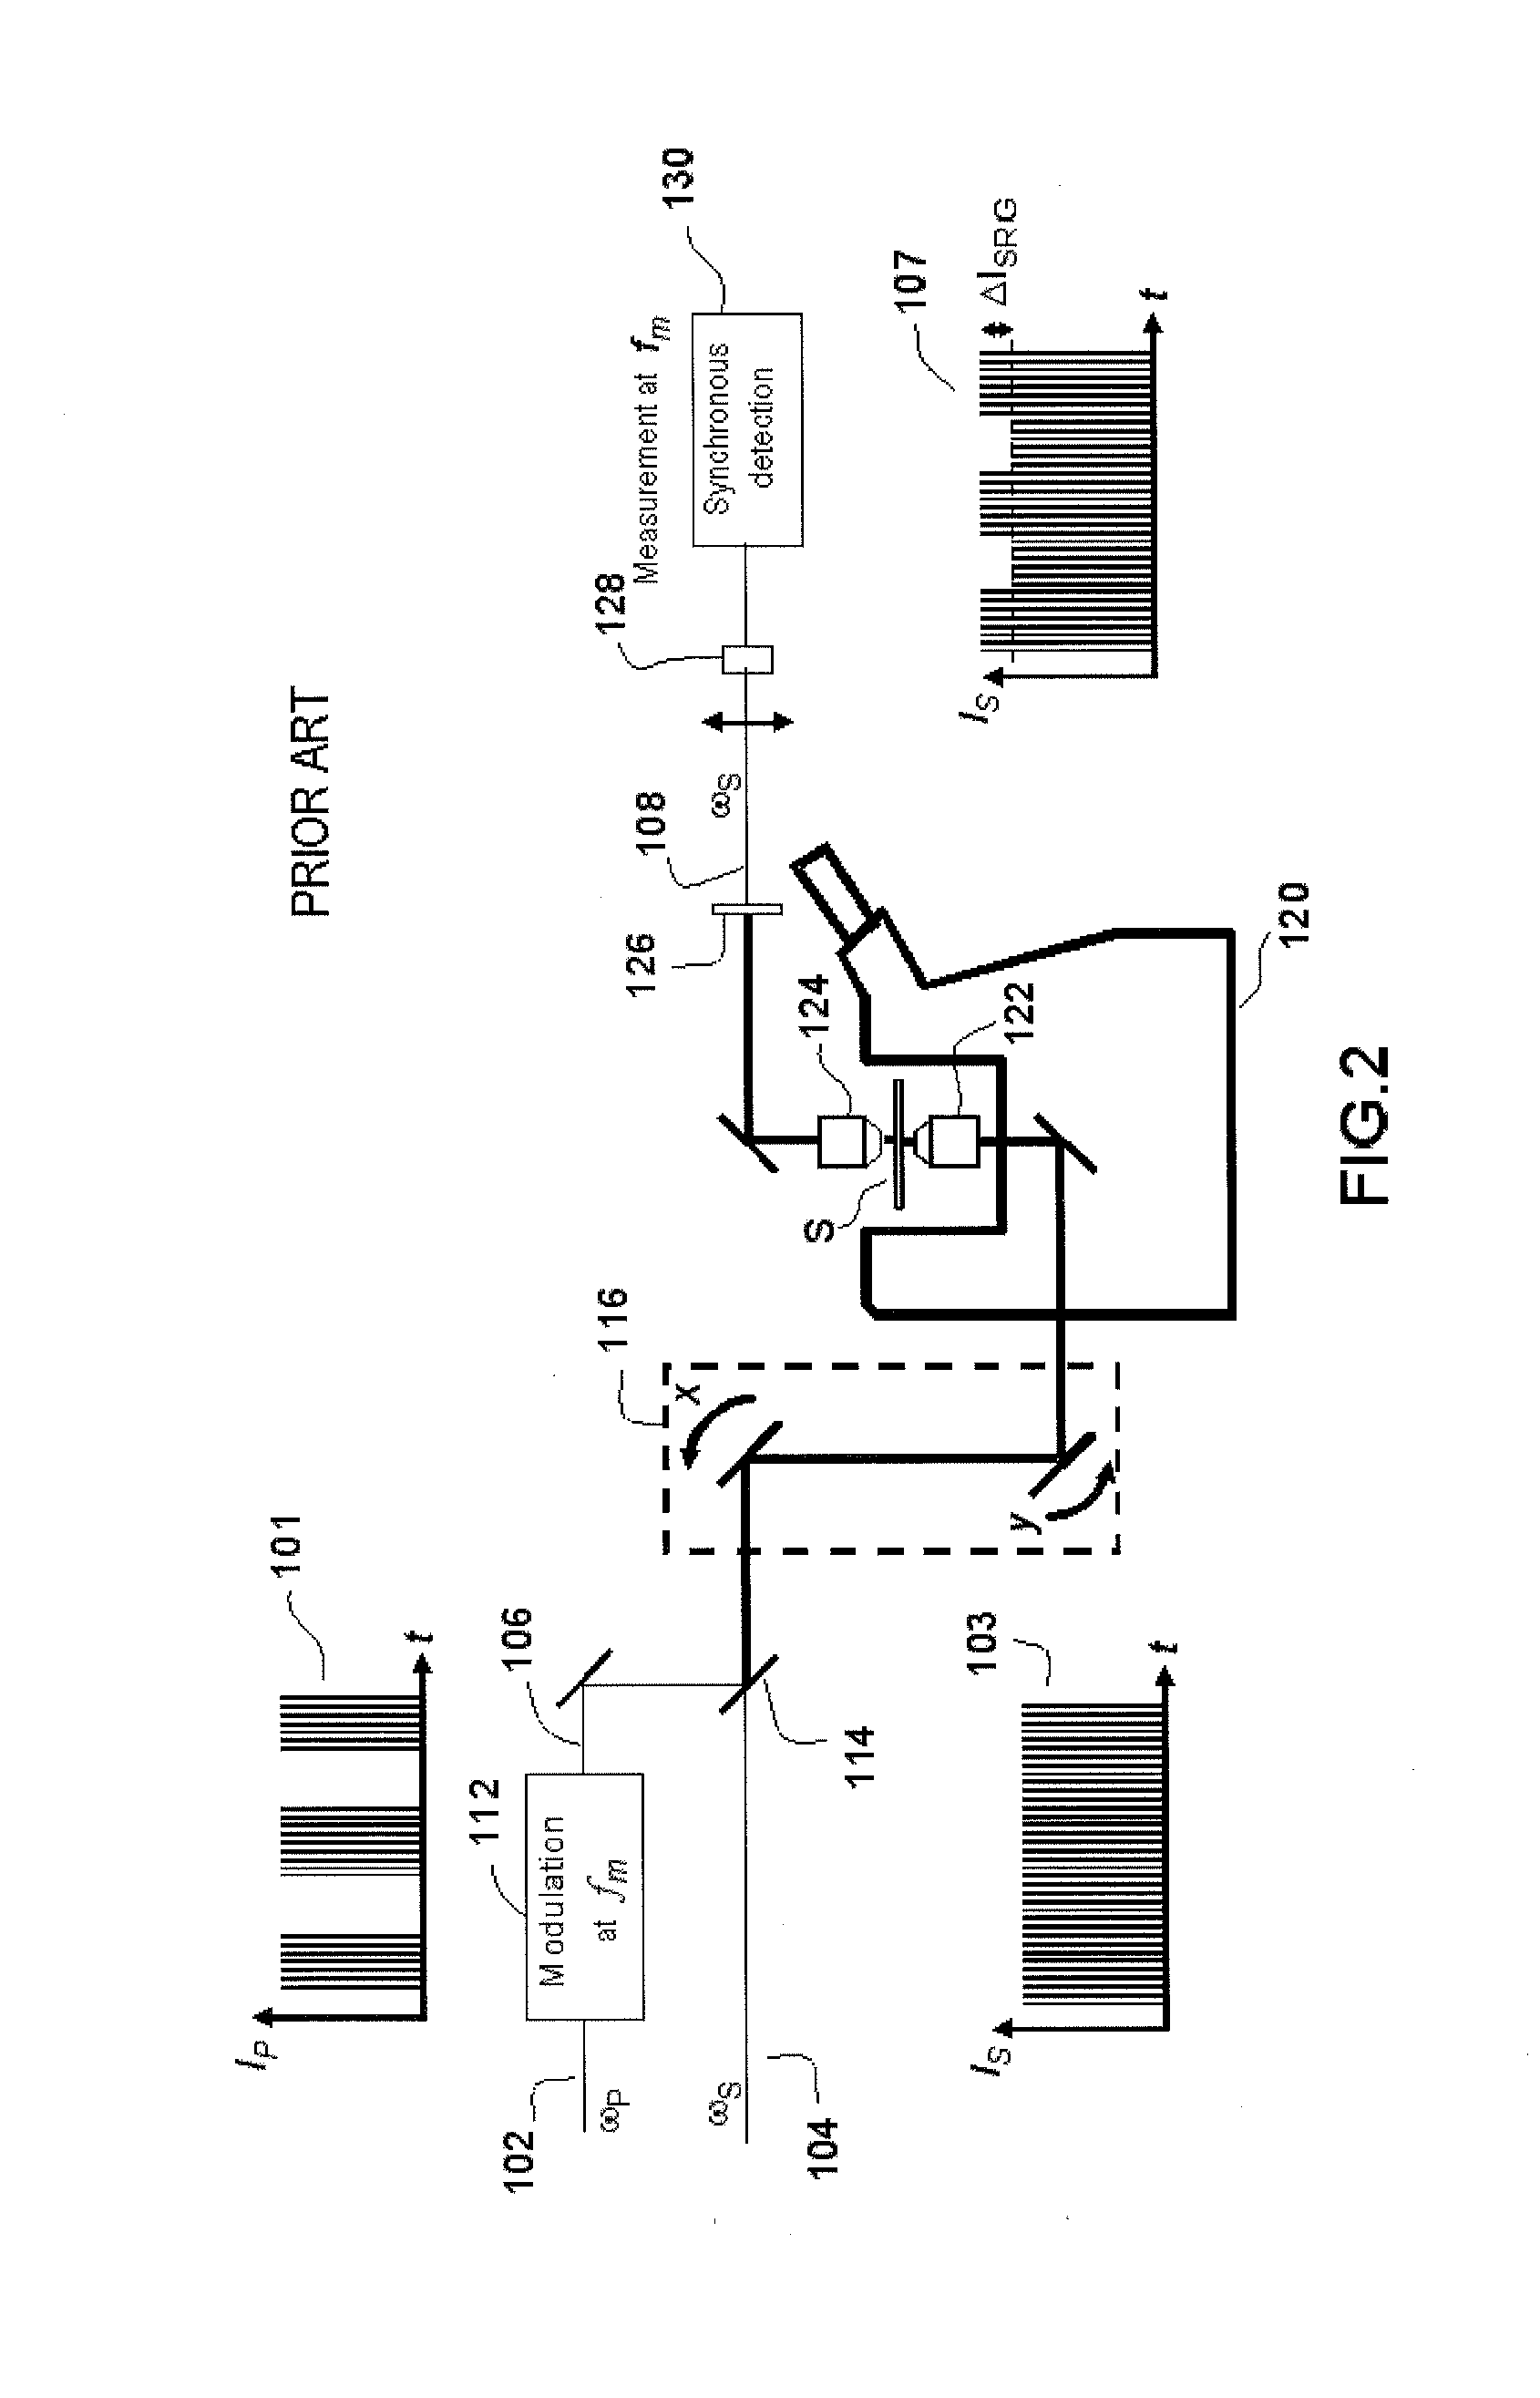 Device and method for stimulated raman detection